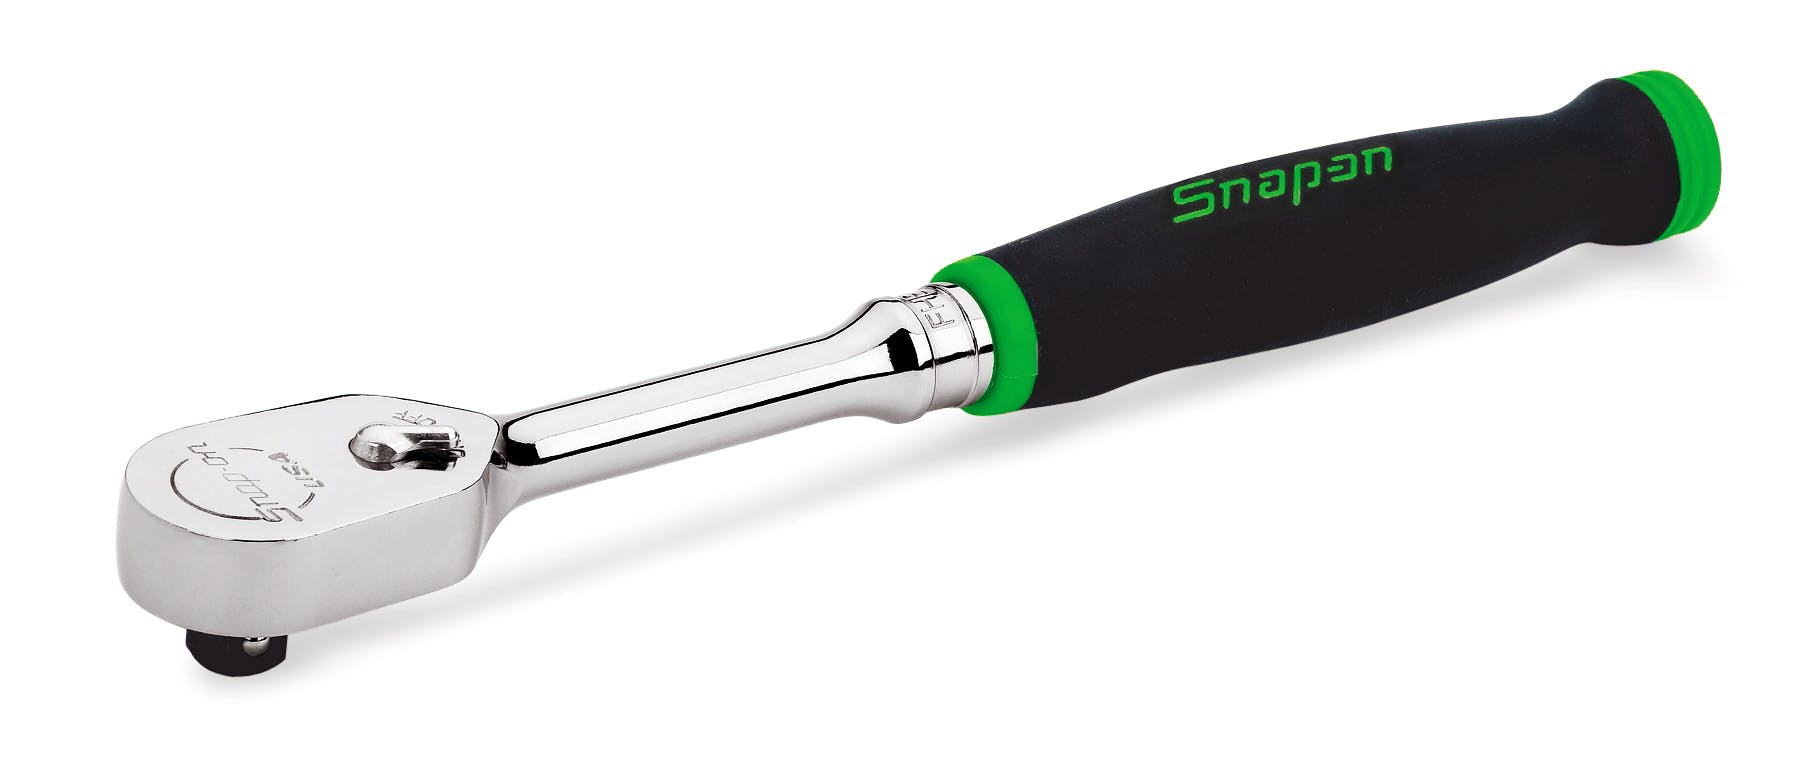 Snap-on Ratchet With Green/Black Comfort Grip Handle 3/8 Drive FH80G